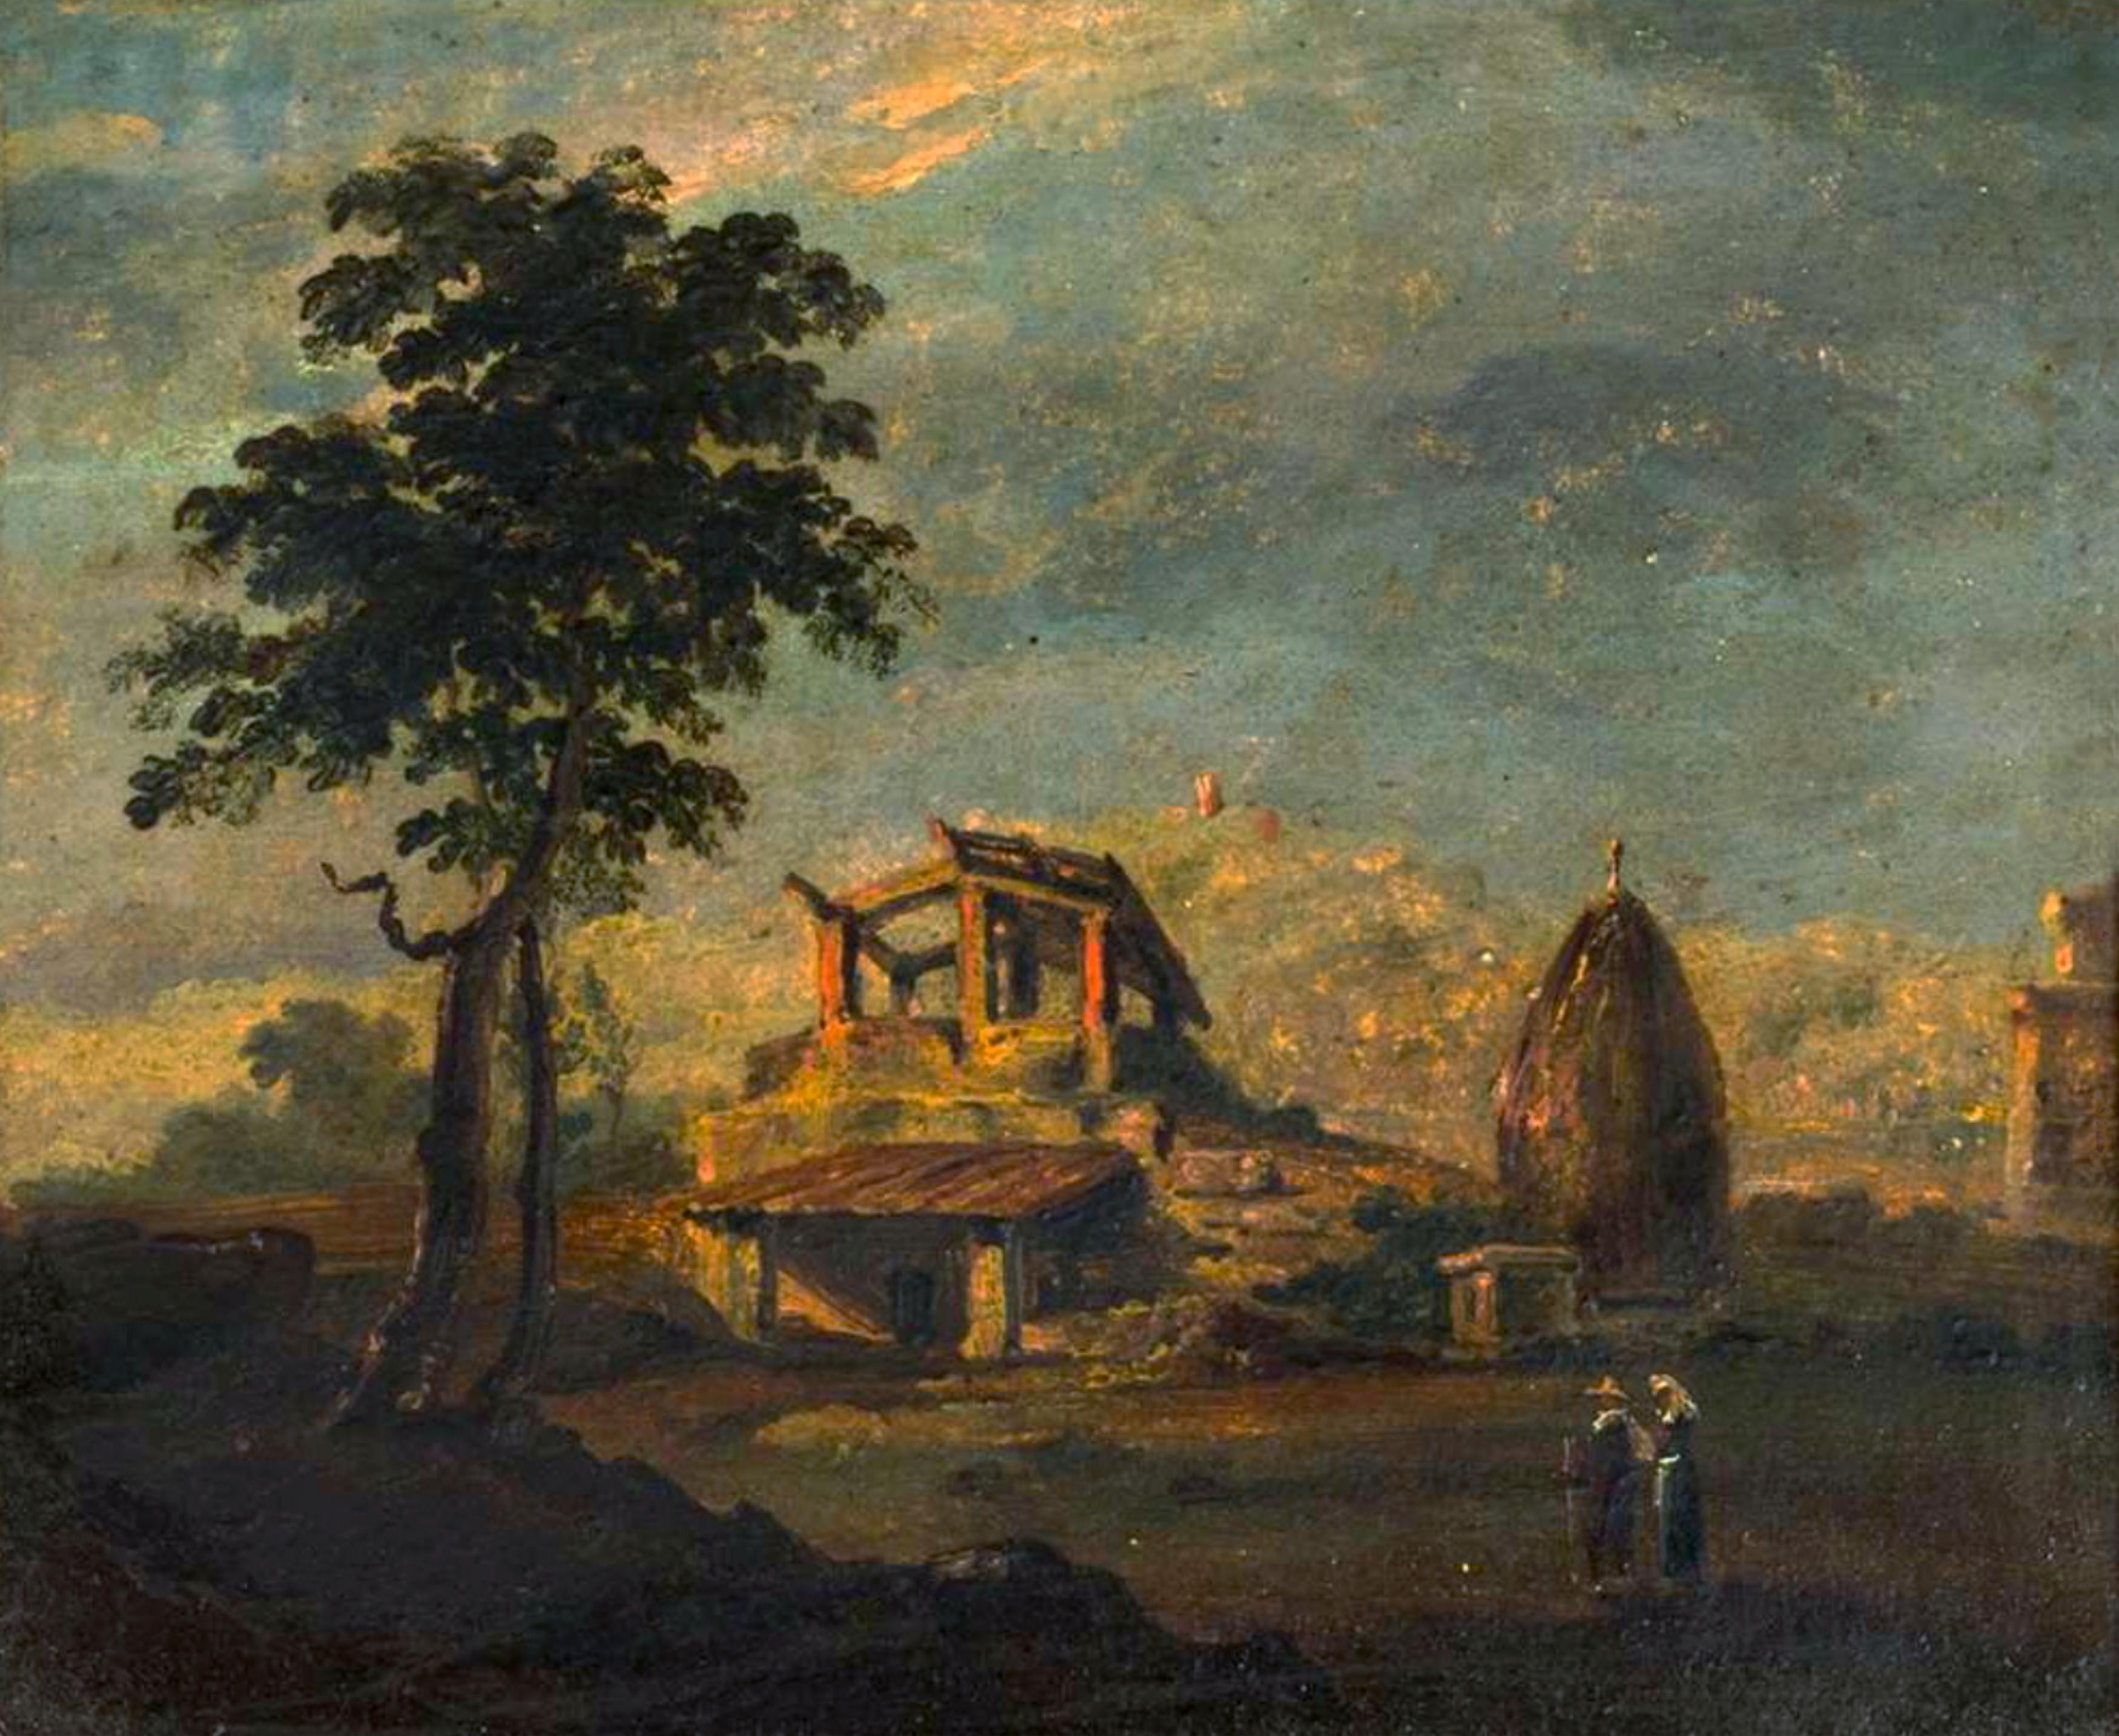 A captivating Romanticism Period painting depicts a beautiful household nestled along a scenic Roman provincial road, Via Appia, a few miles away from the capital city. The painting, executed on cardboard with a wooden frame, captures the serene